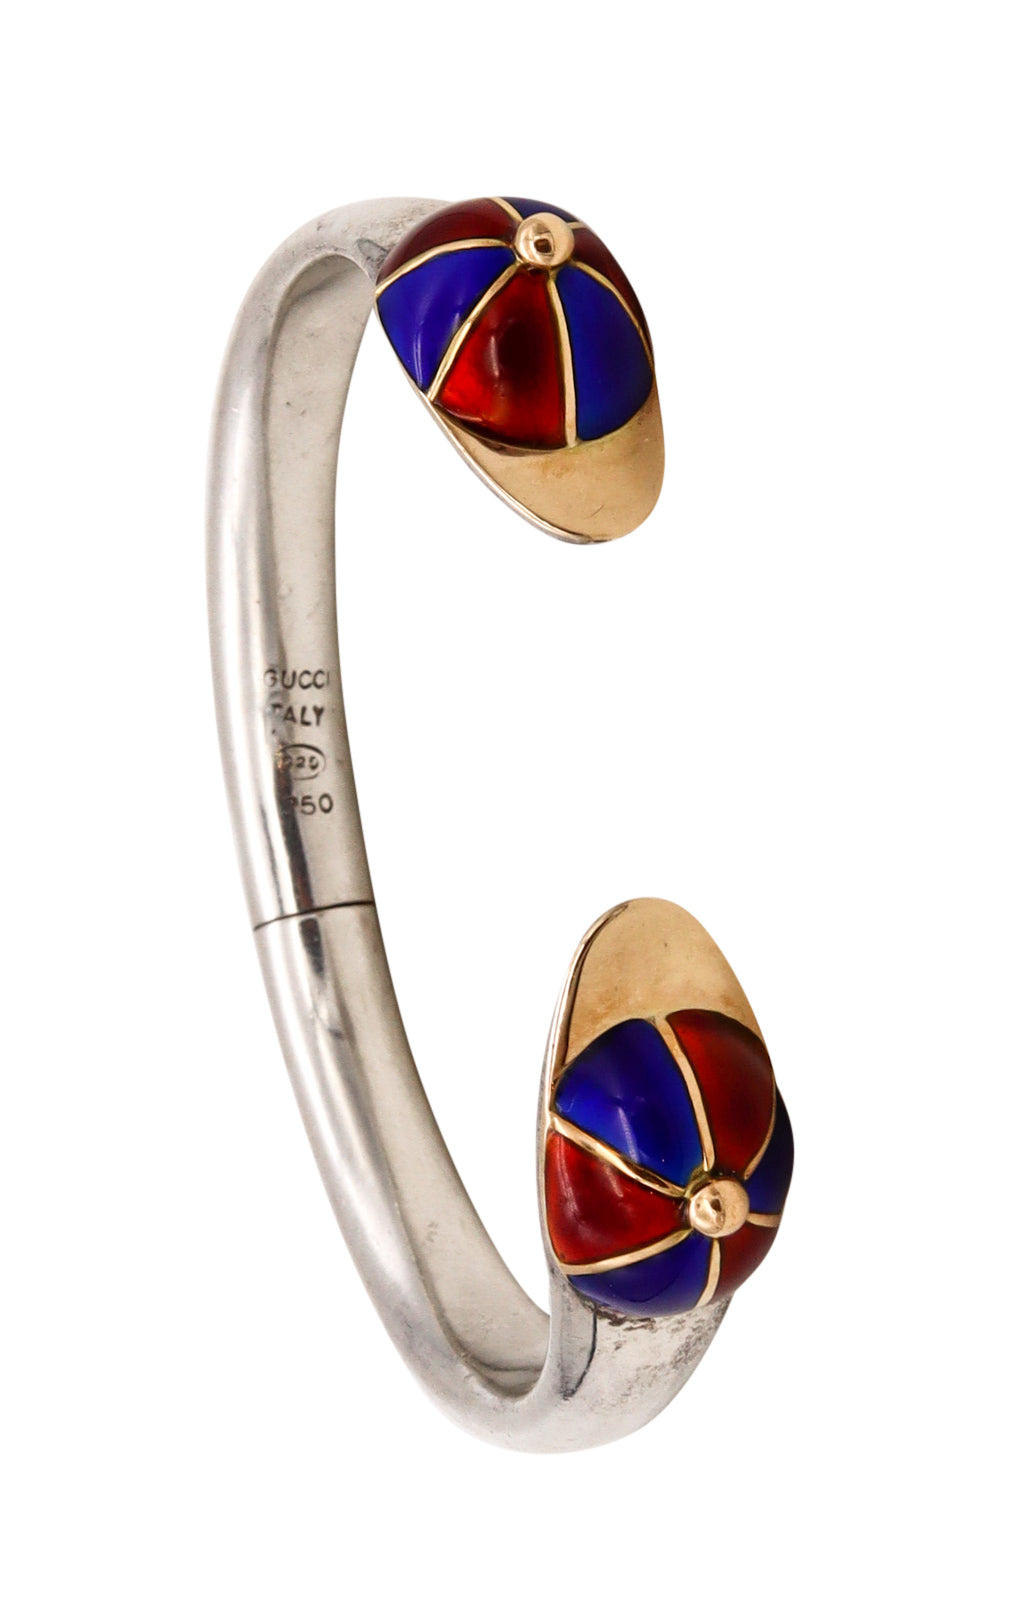 Gucci Milan 1970 Rare Equestrian Jockey Hats Cuff In 18Kt Gold And Sterling With Red & Blue Enamel